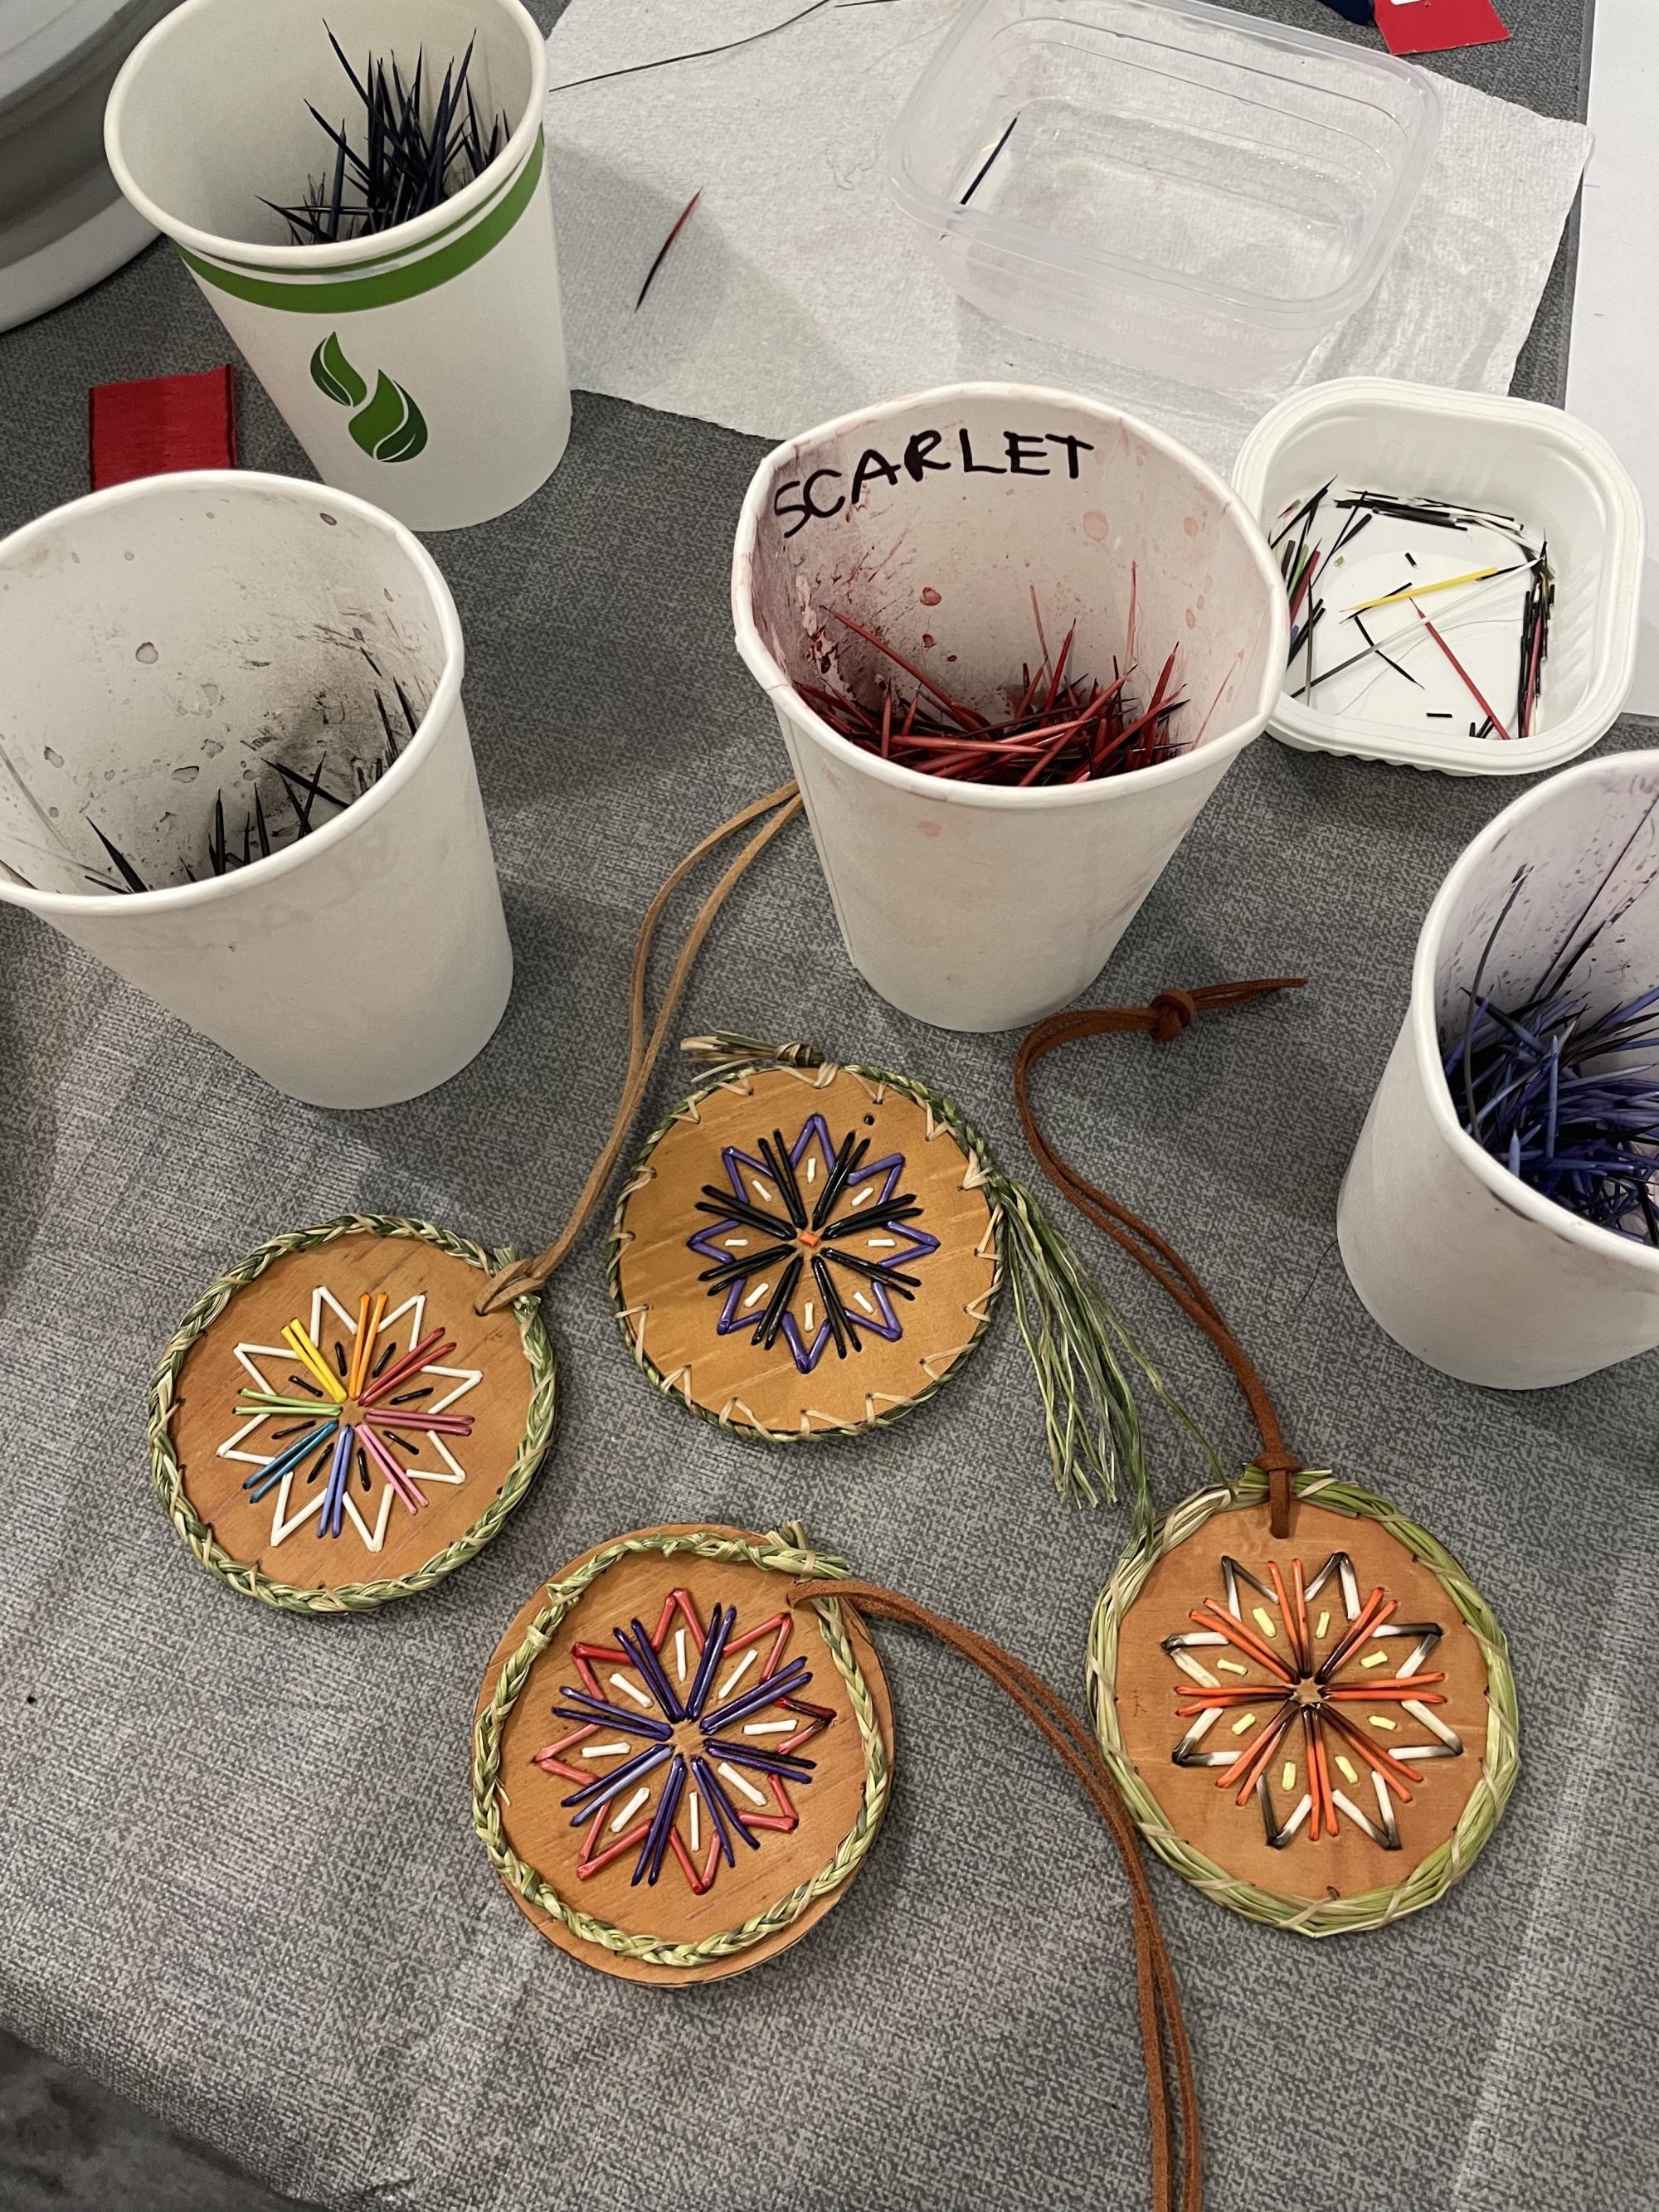 [ID: "Four colourful porcupine quill medallions made by workshop participants with birch bark, sweetgrass, and dyed quills."]